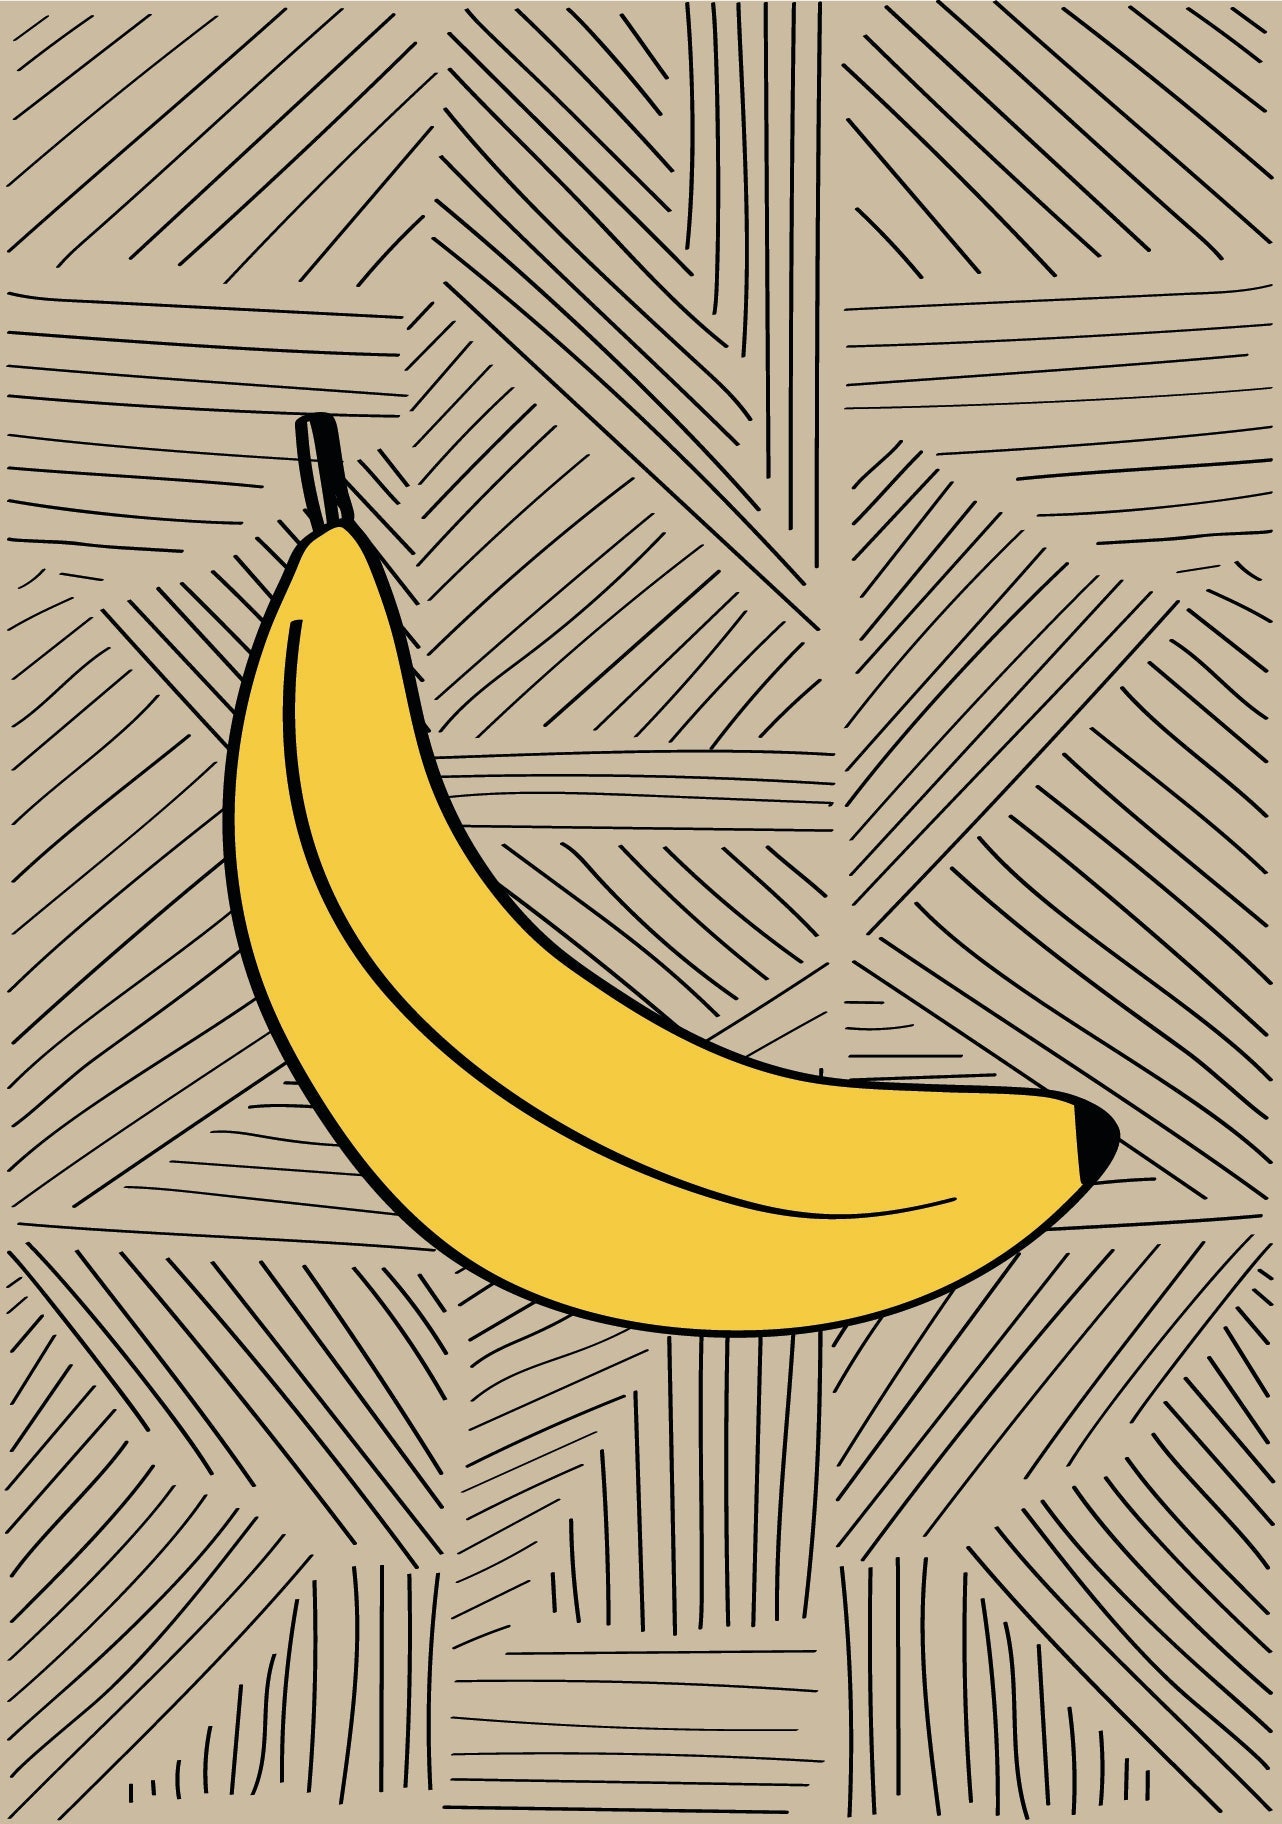 Banana greeting card, bright yellow fruit on beige background with graphic thin lines on background